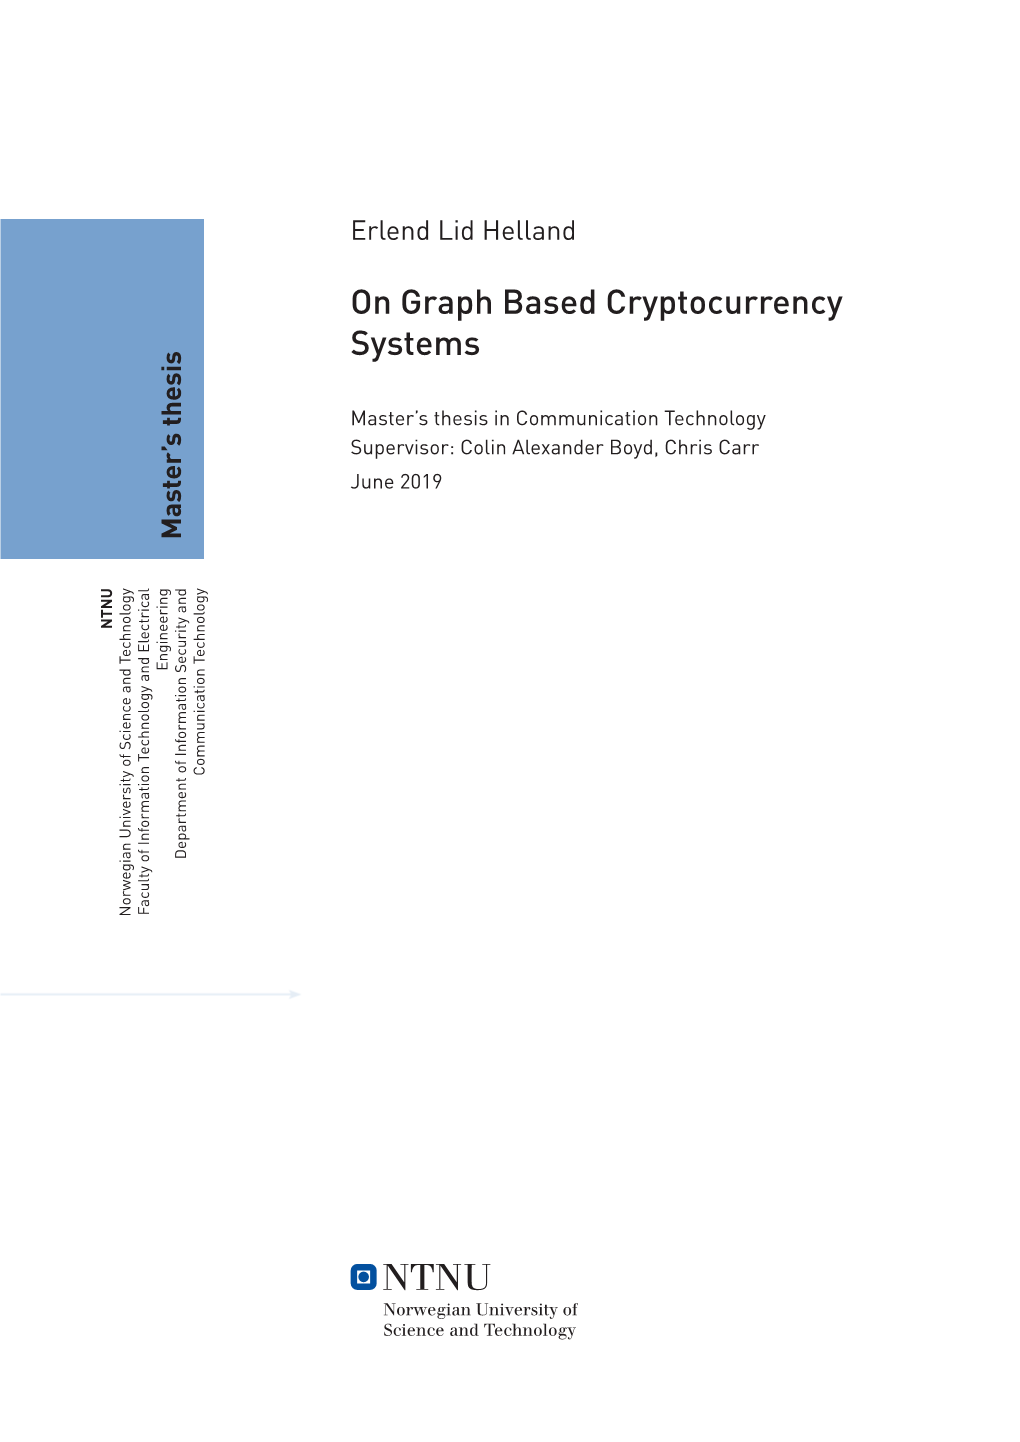 On Graph Based Cryptocurrency Systems